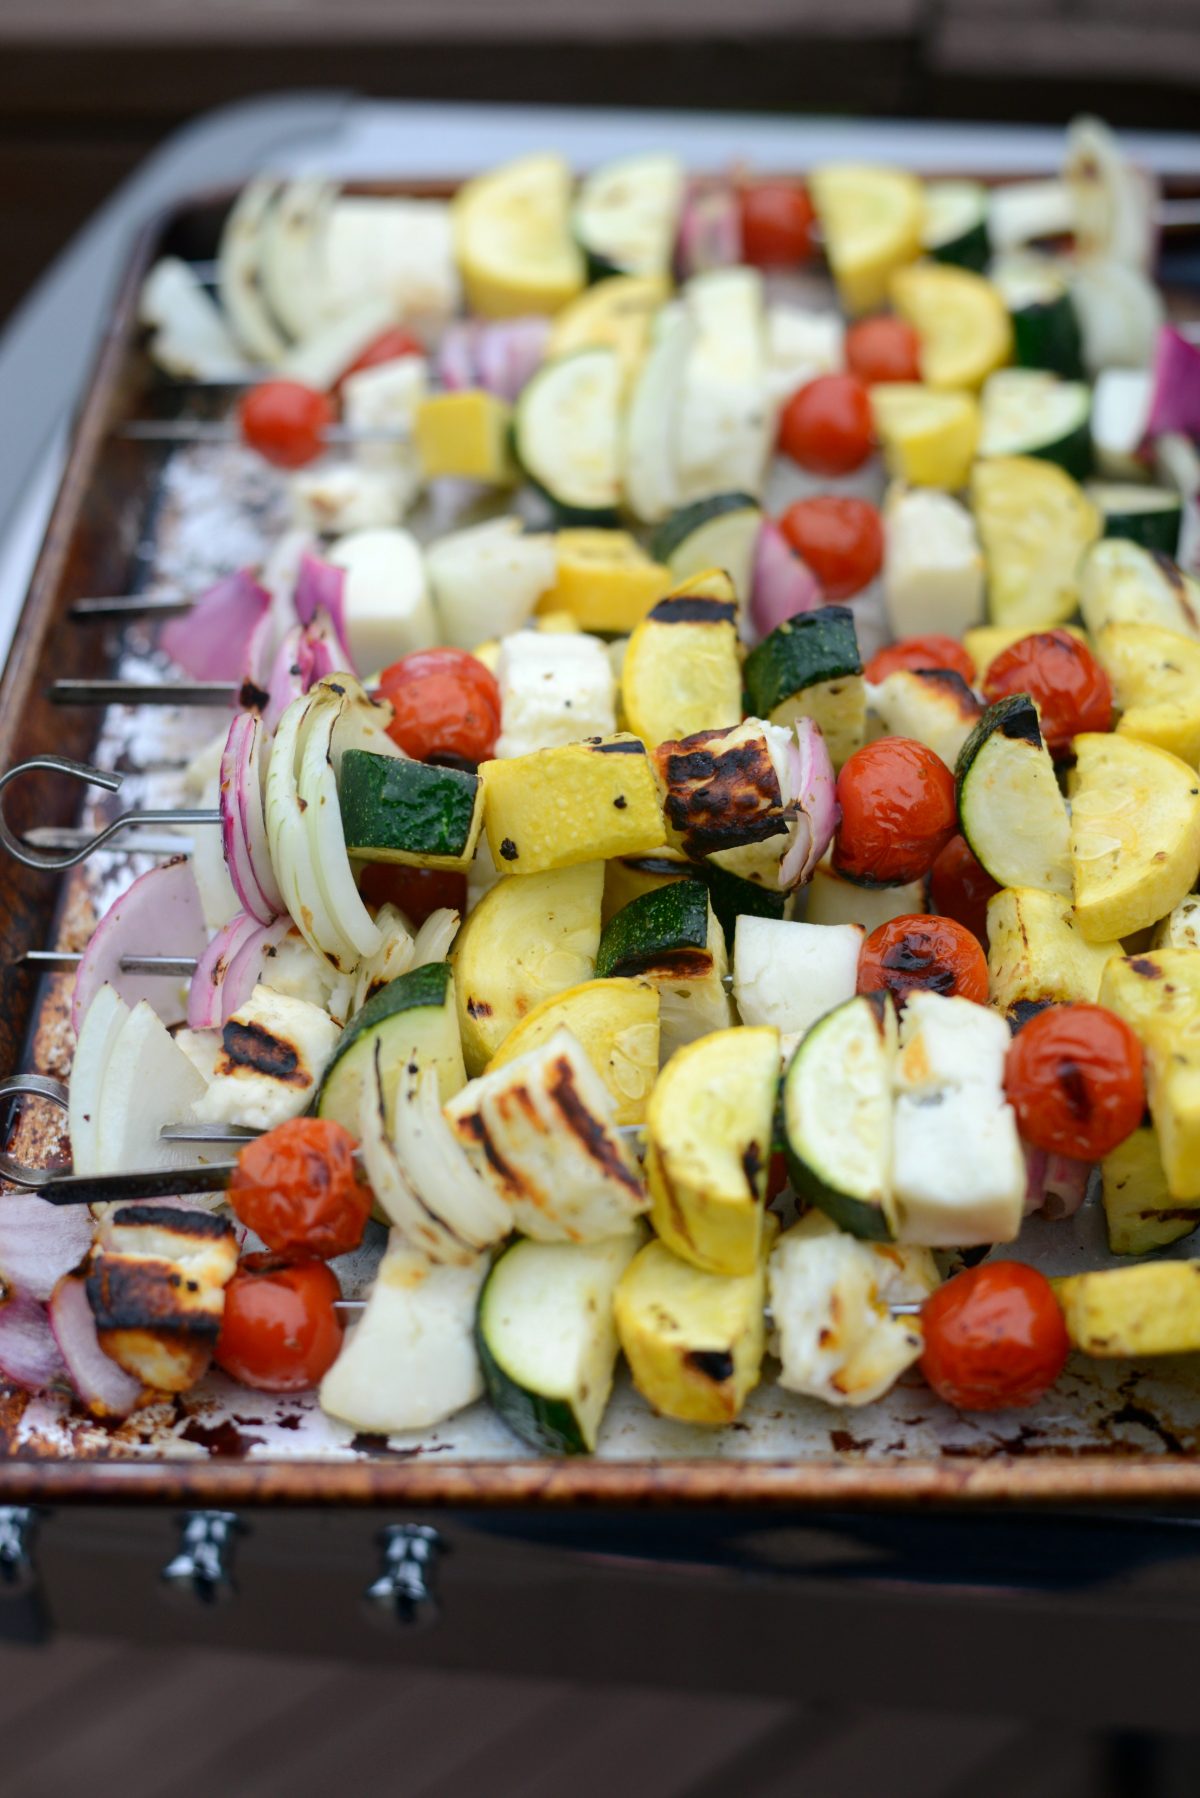 Grilled Halloumi Vegetable Skewers l SimplyScratch.com